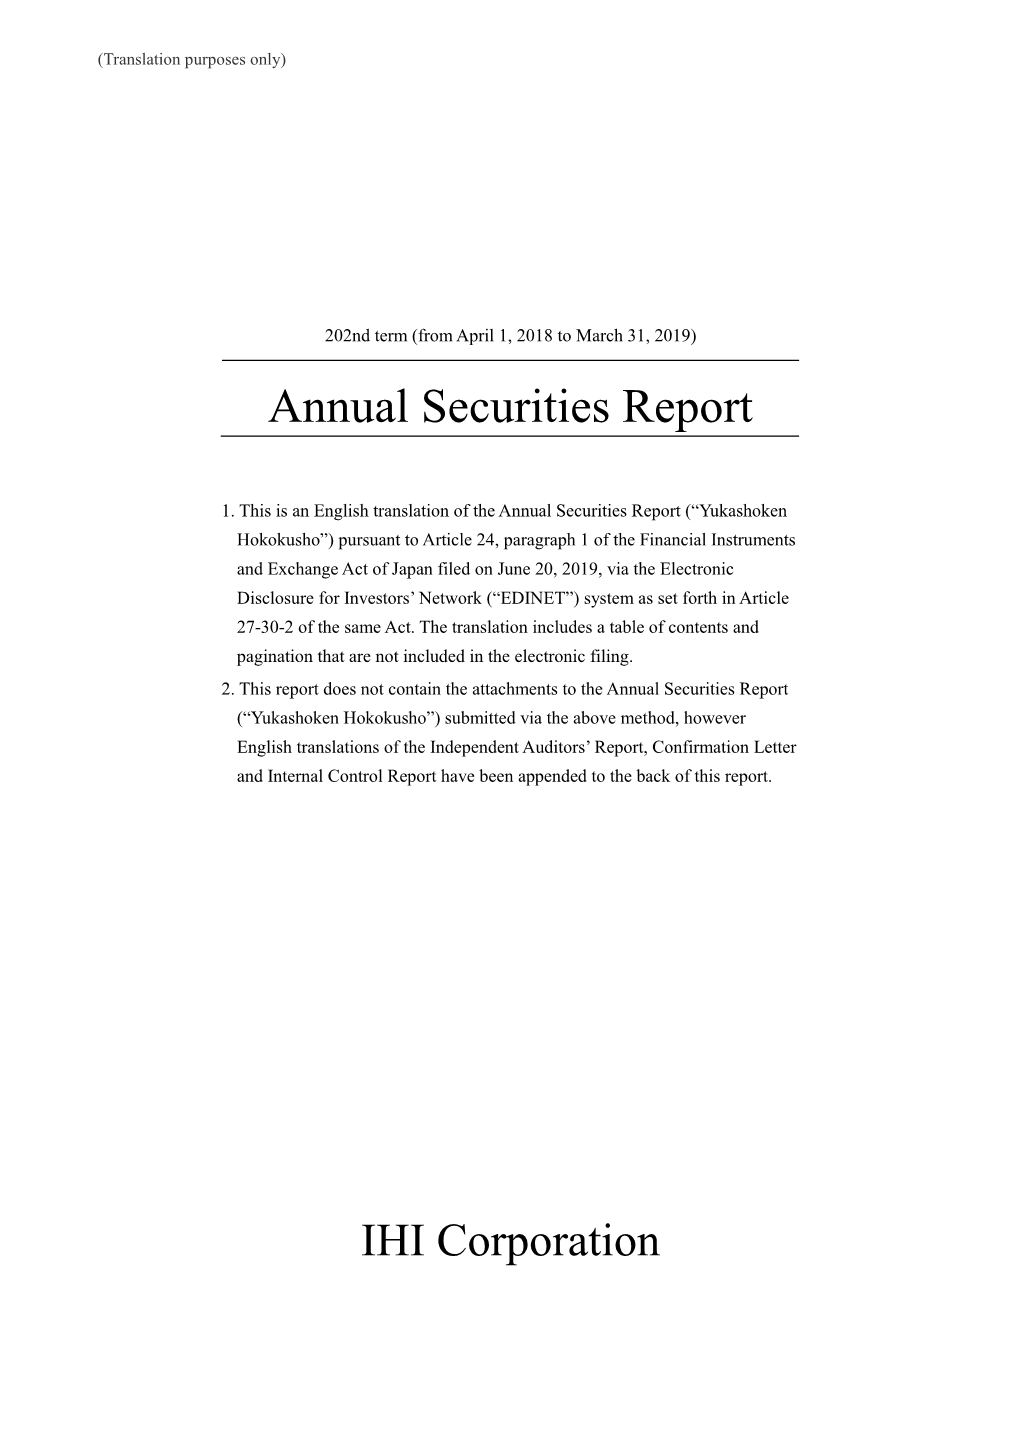 202Nd Term Annual Securities Report Cover Page